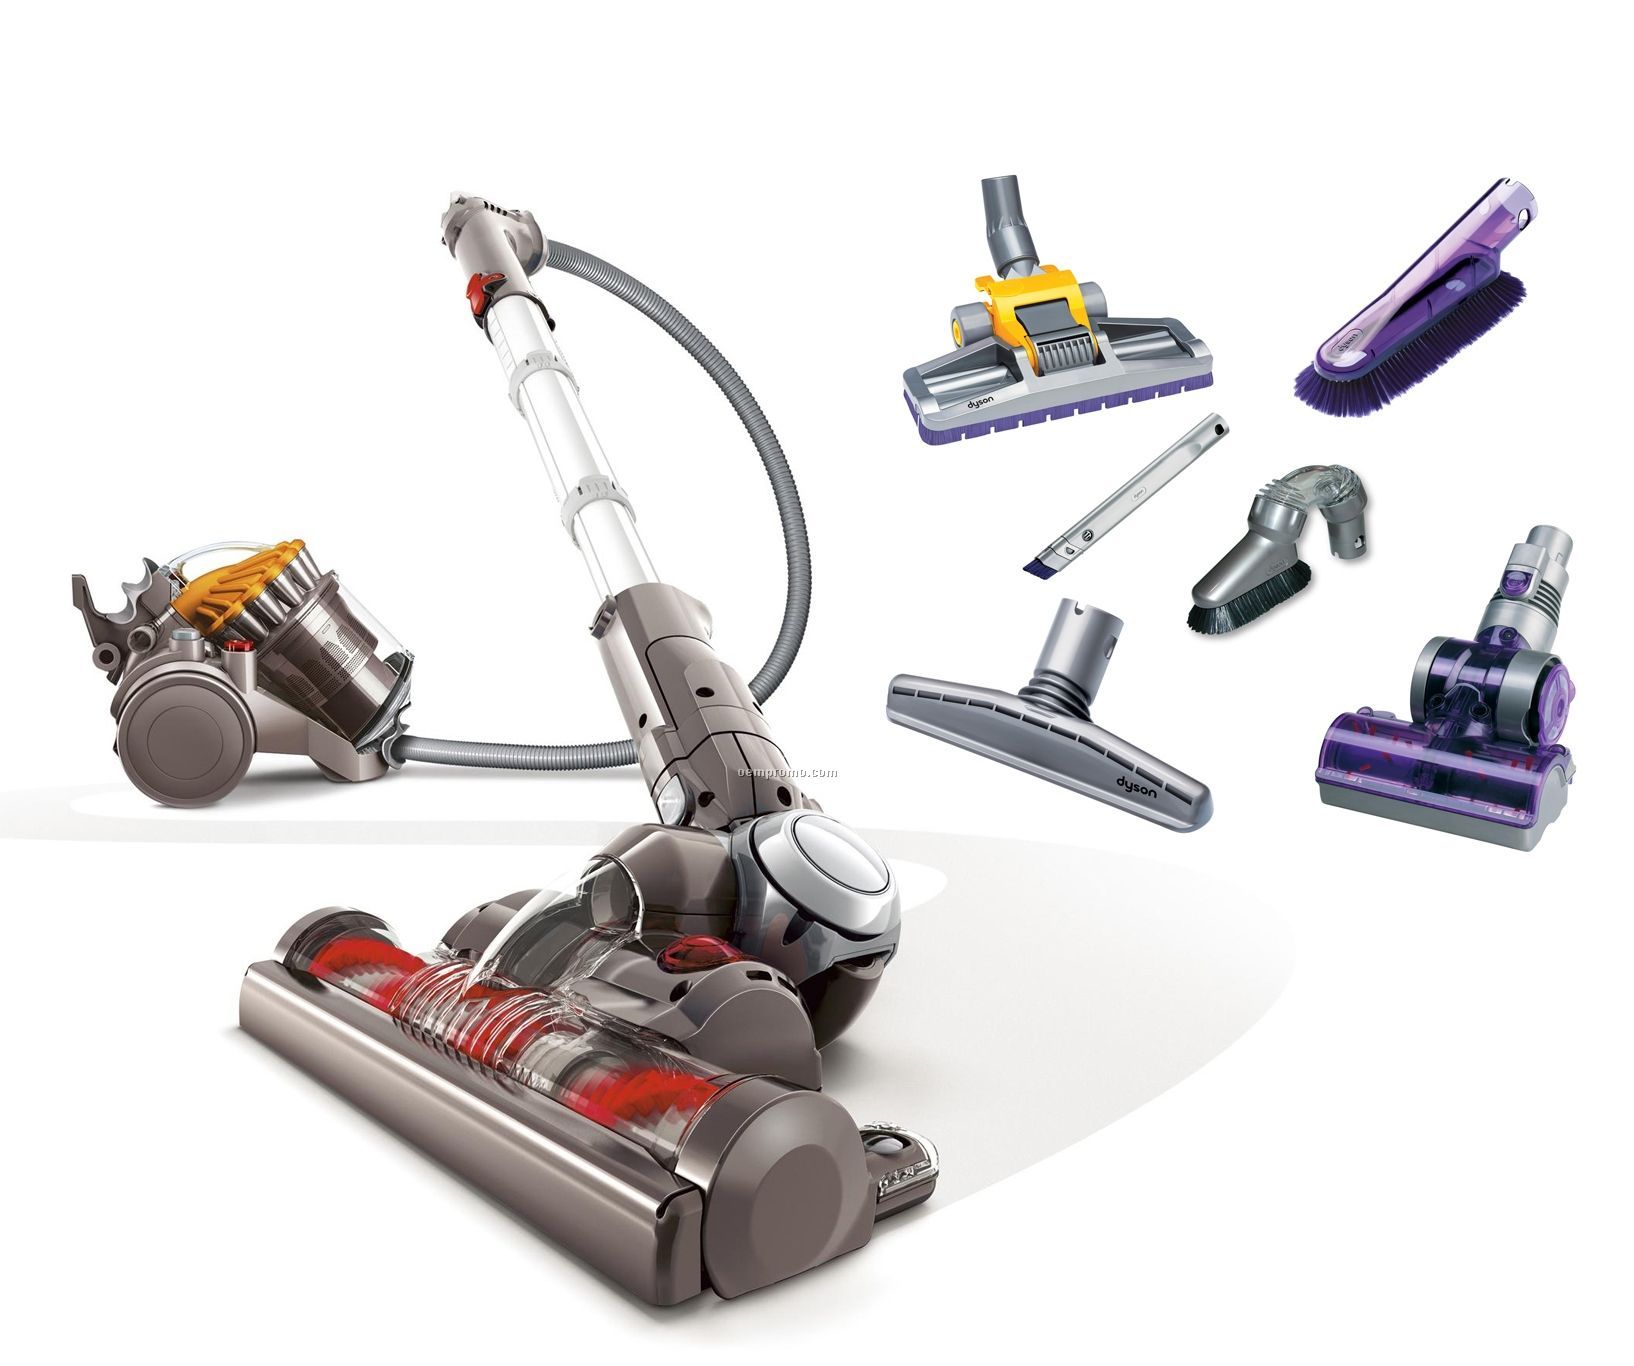 Dyson Dc23 Stowaway Motorhead Canister Vacuum And Total Gear Kit